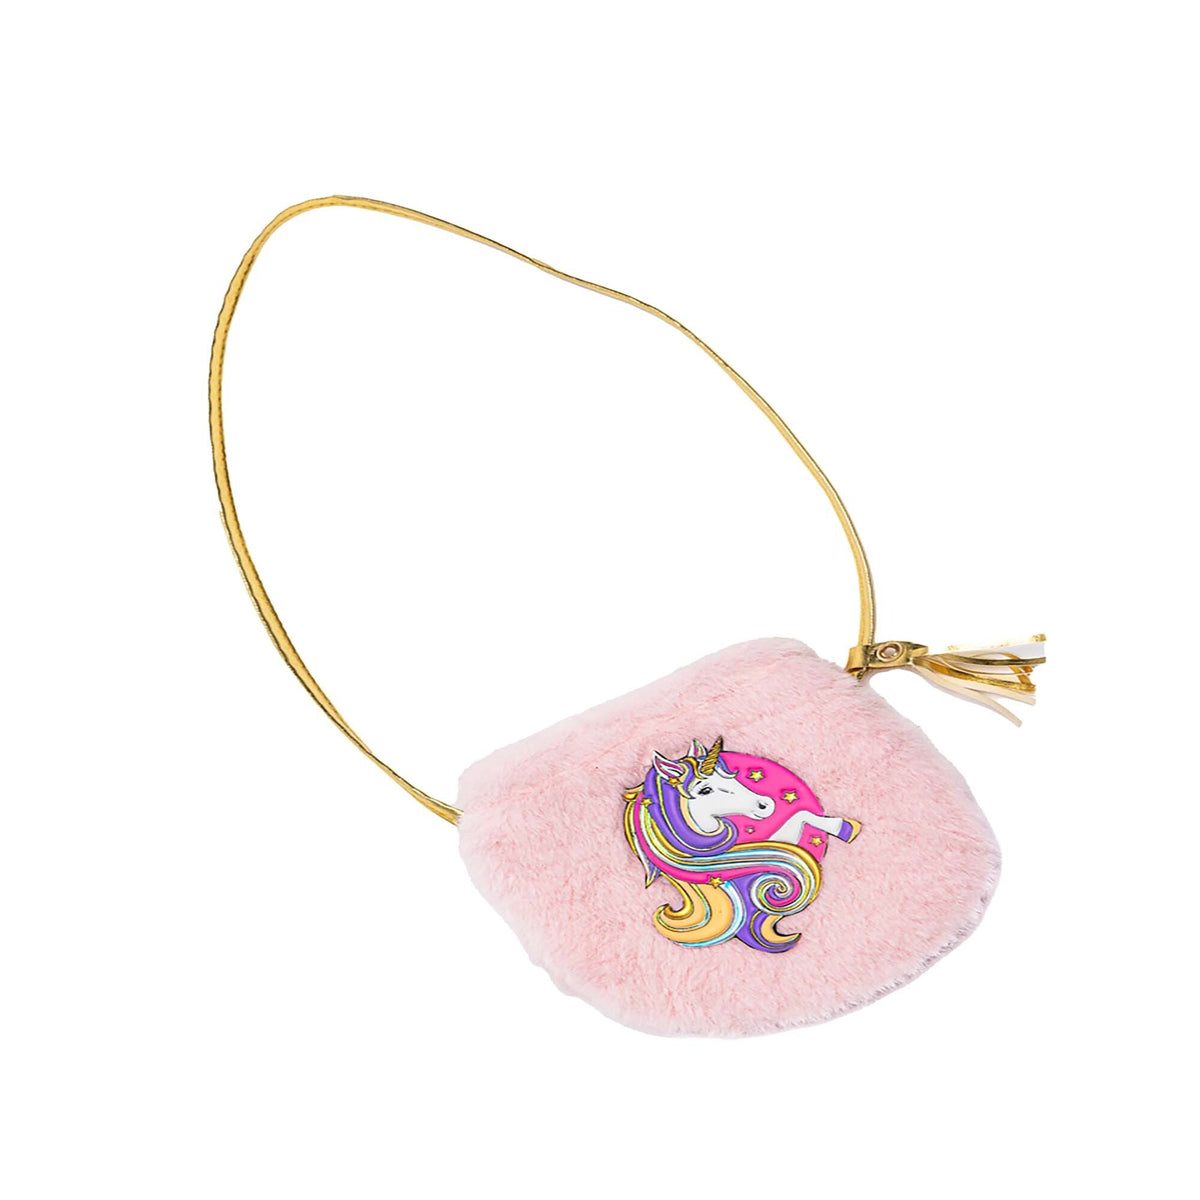 Great Pretenders impulse buying Pink Fluffy Unicorn Purse, 1 Count